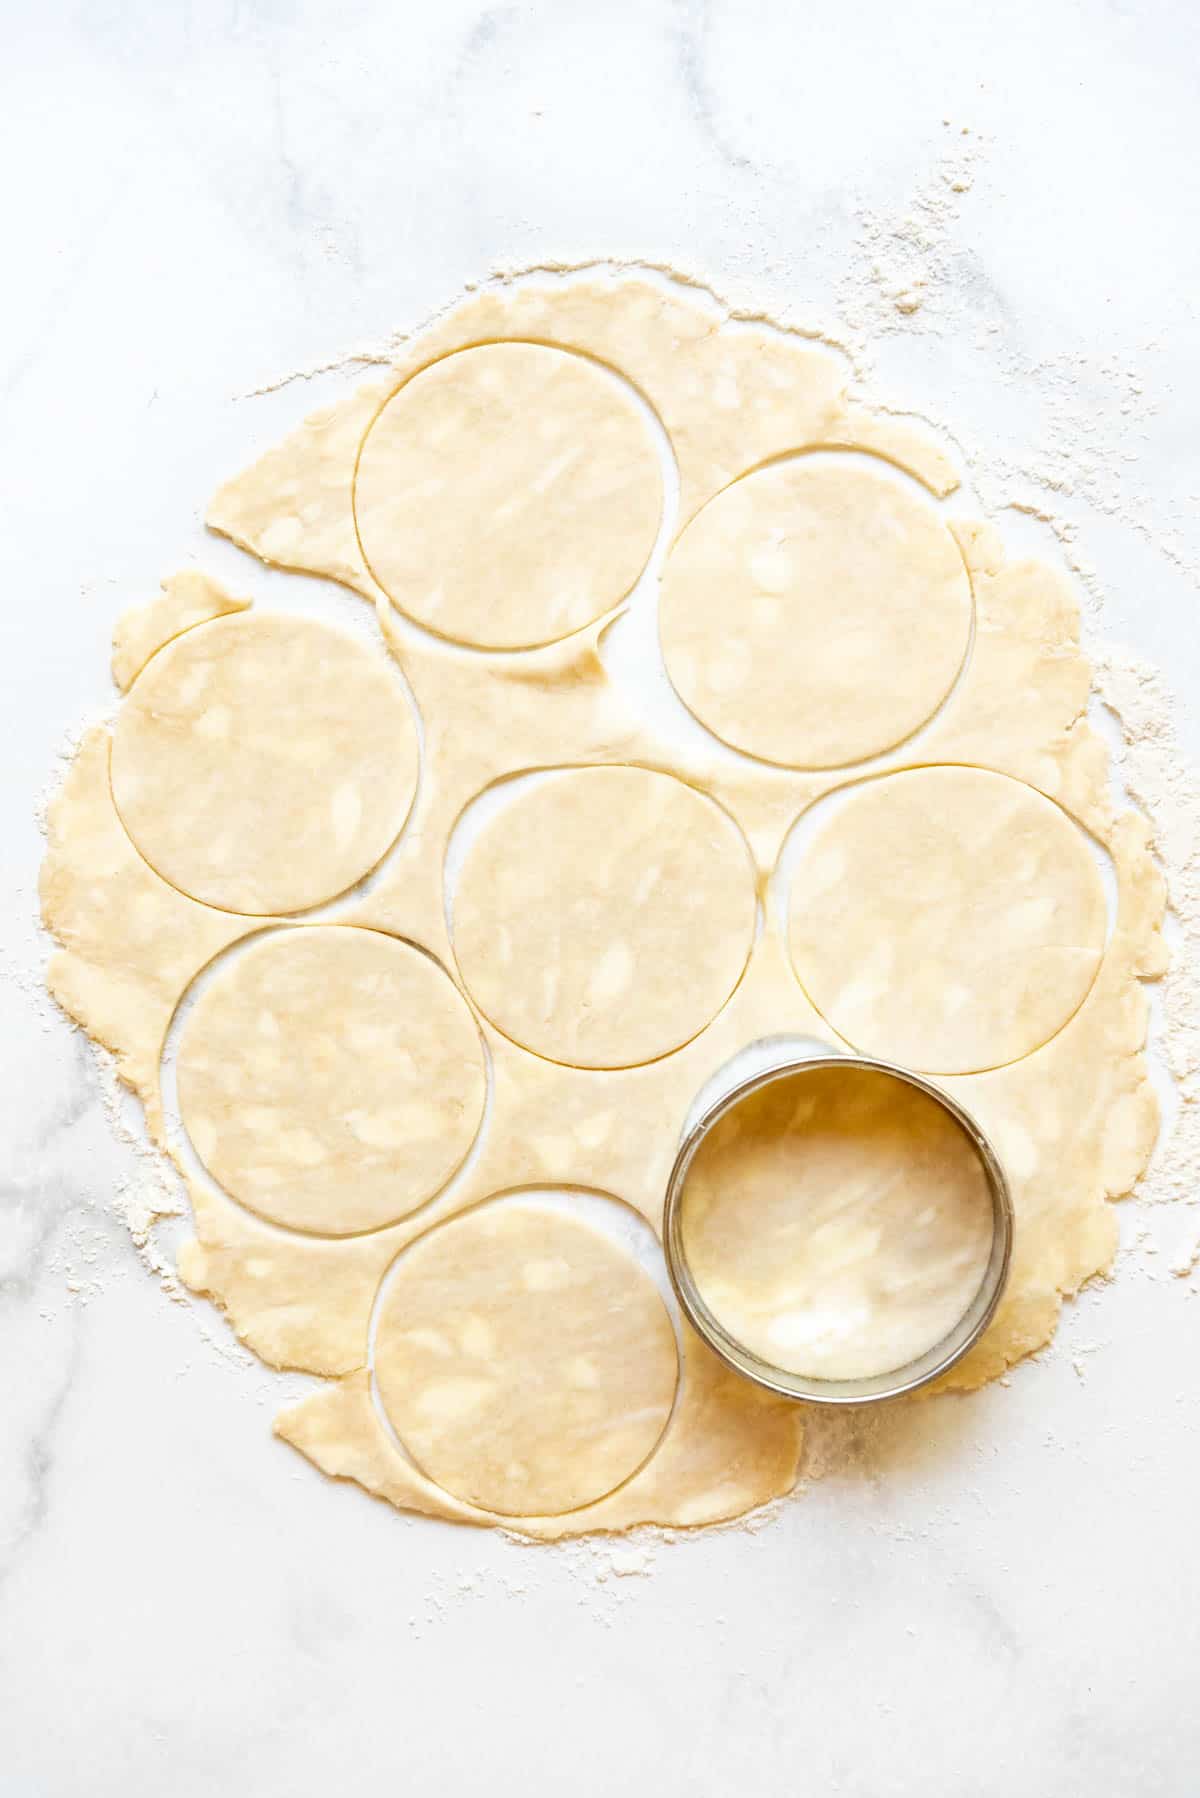 Cutting out circles of pie dough with a large round cutter.